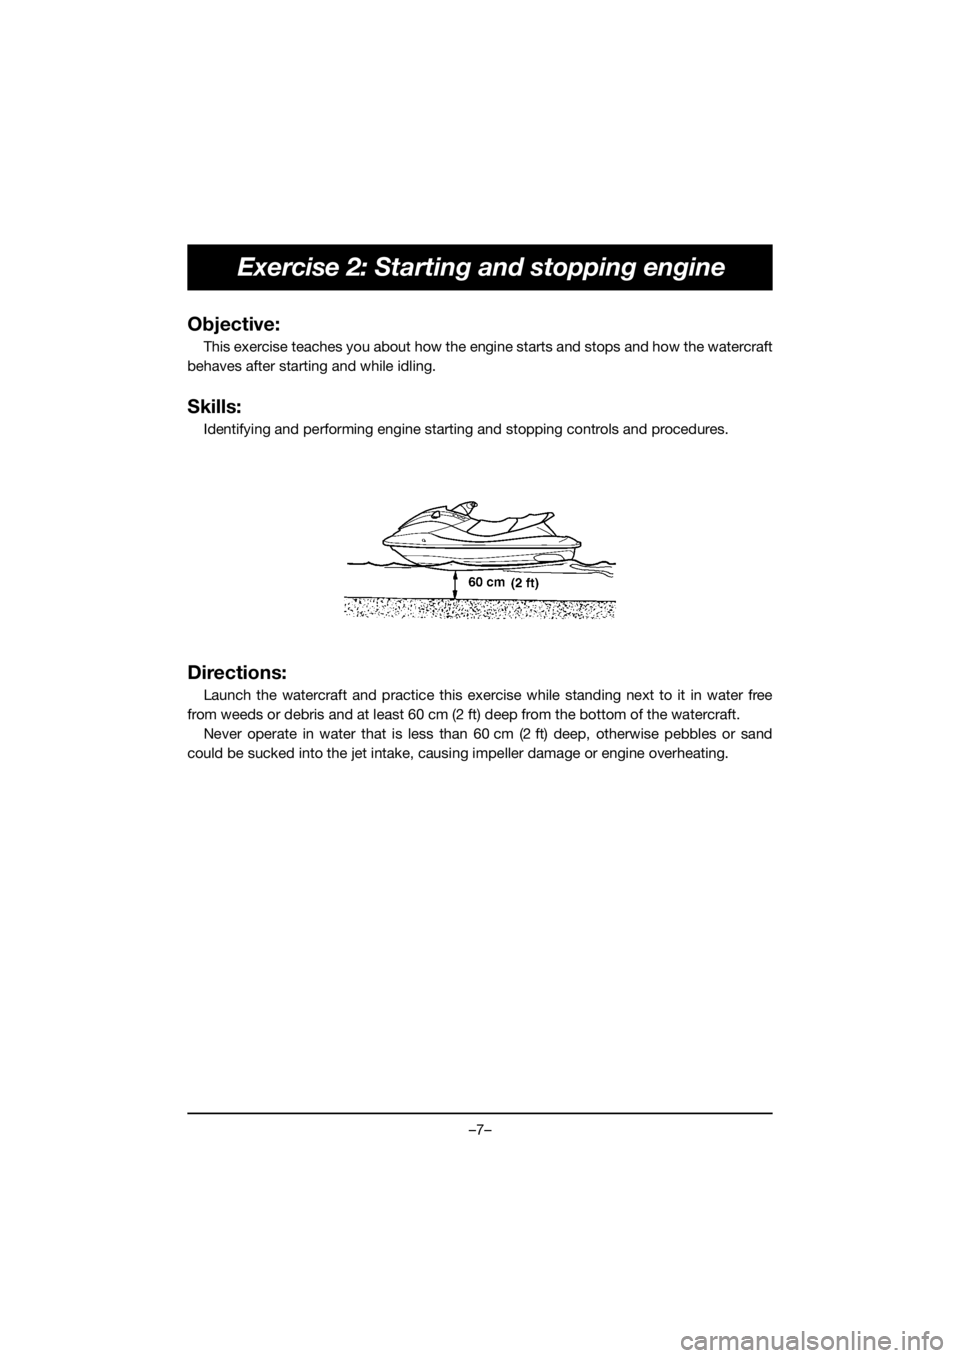 YAMAHA VX DELUXE 2019  Manual de utilização (in Portuguese) –7–
Exercise 2: Starting and stopping engine
Objective:
This exercise teaches you about how the engine starts and stops and how the watercraft
behaves after starting and while idling.
Skills:
Iden